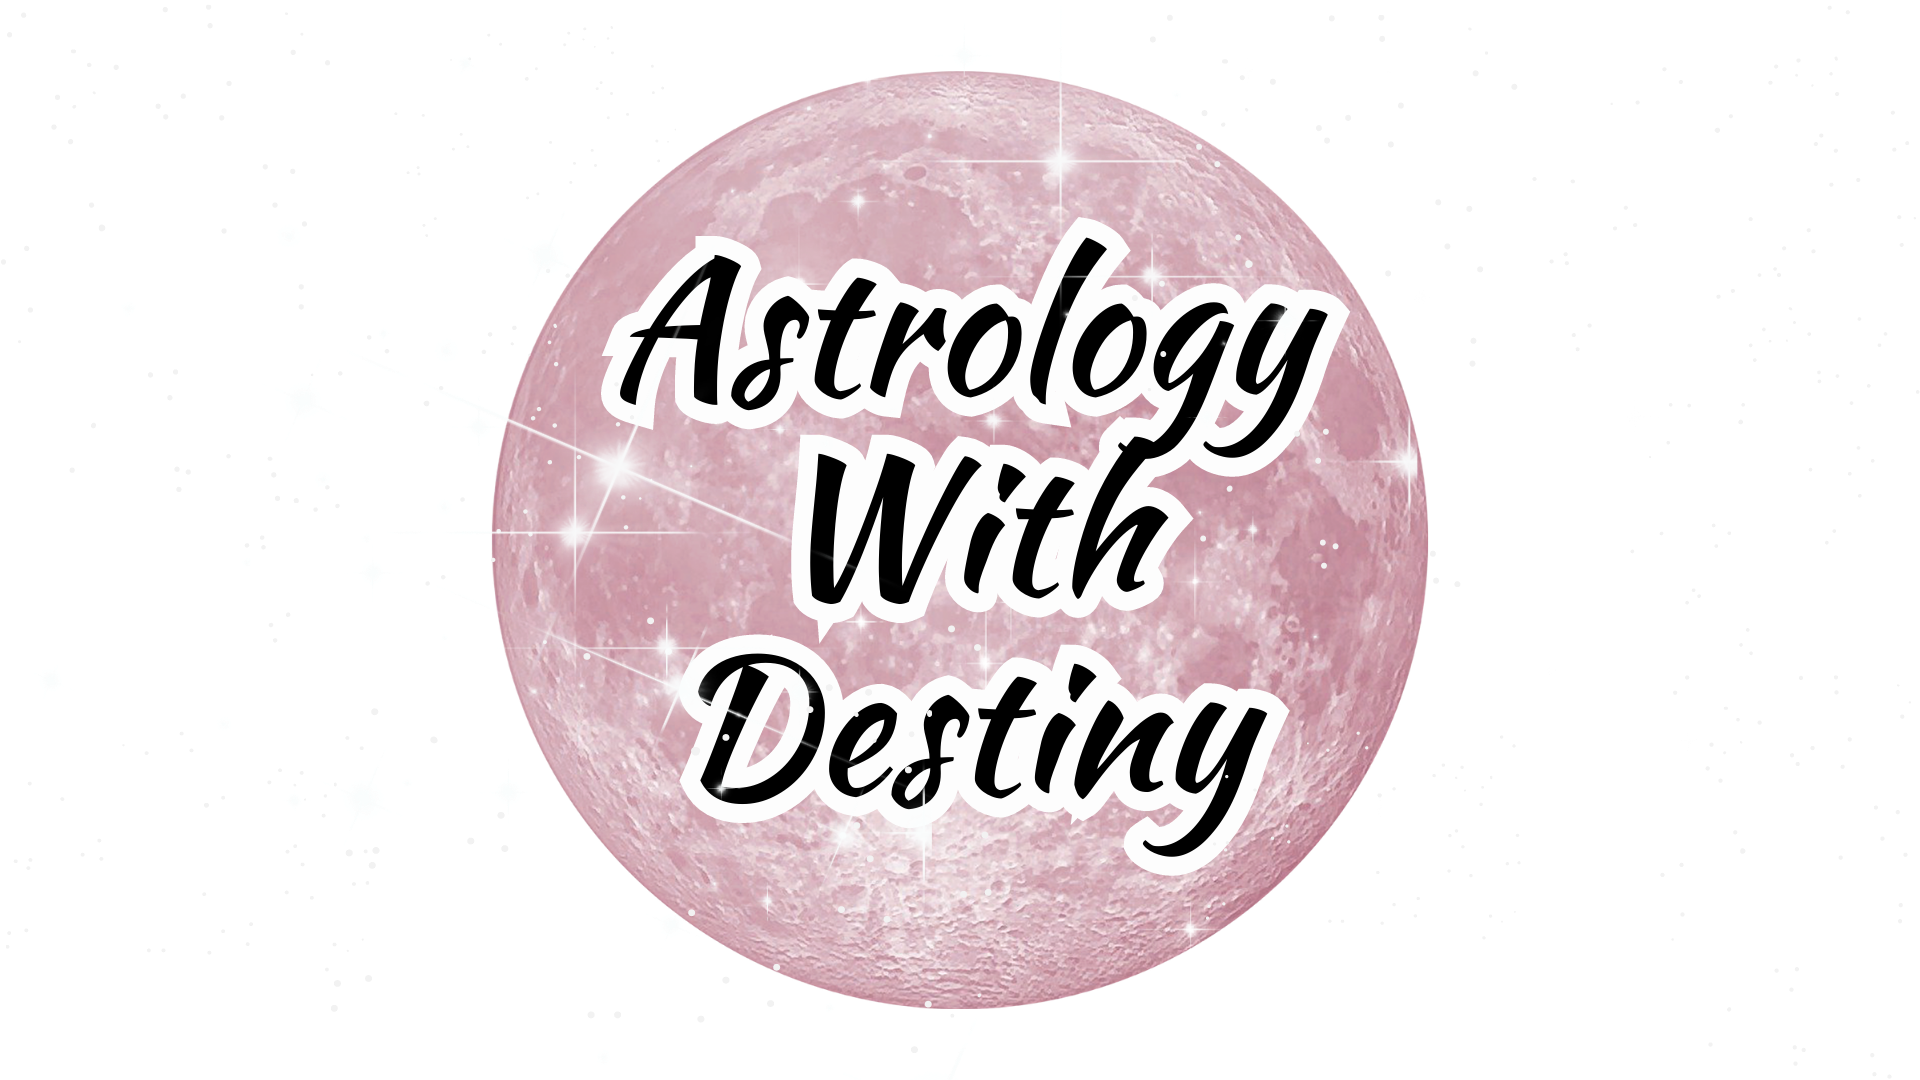 Astrology With Destiny